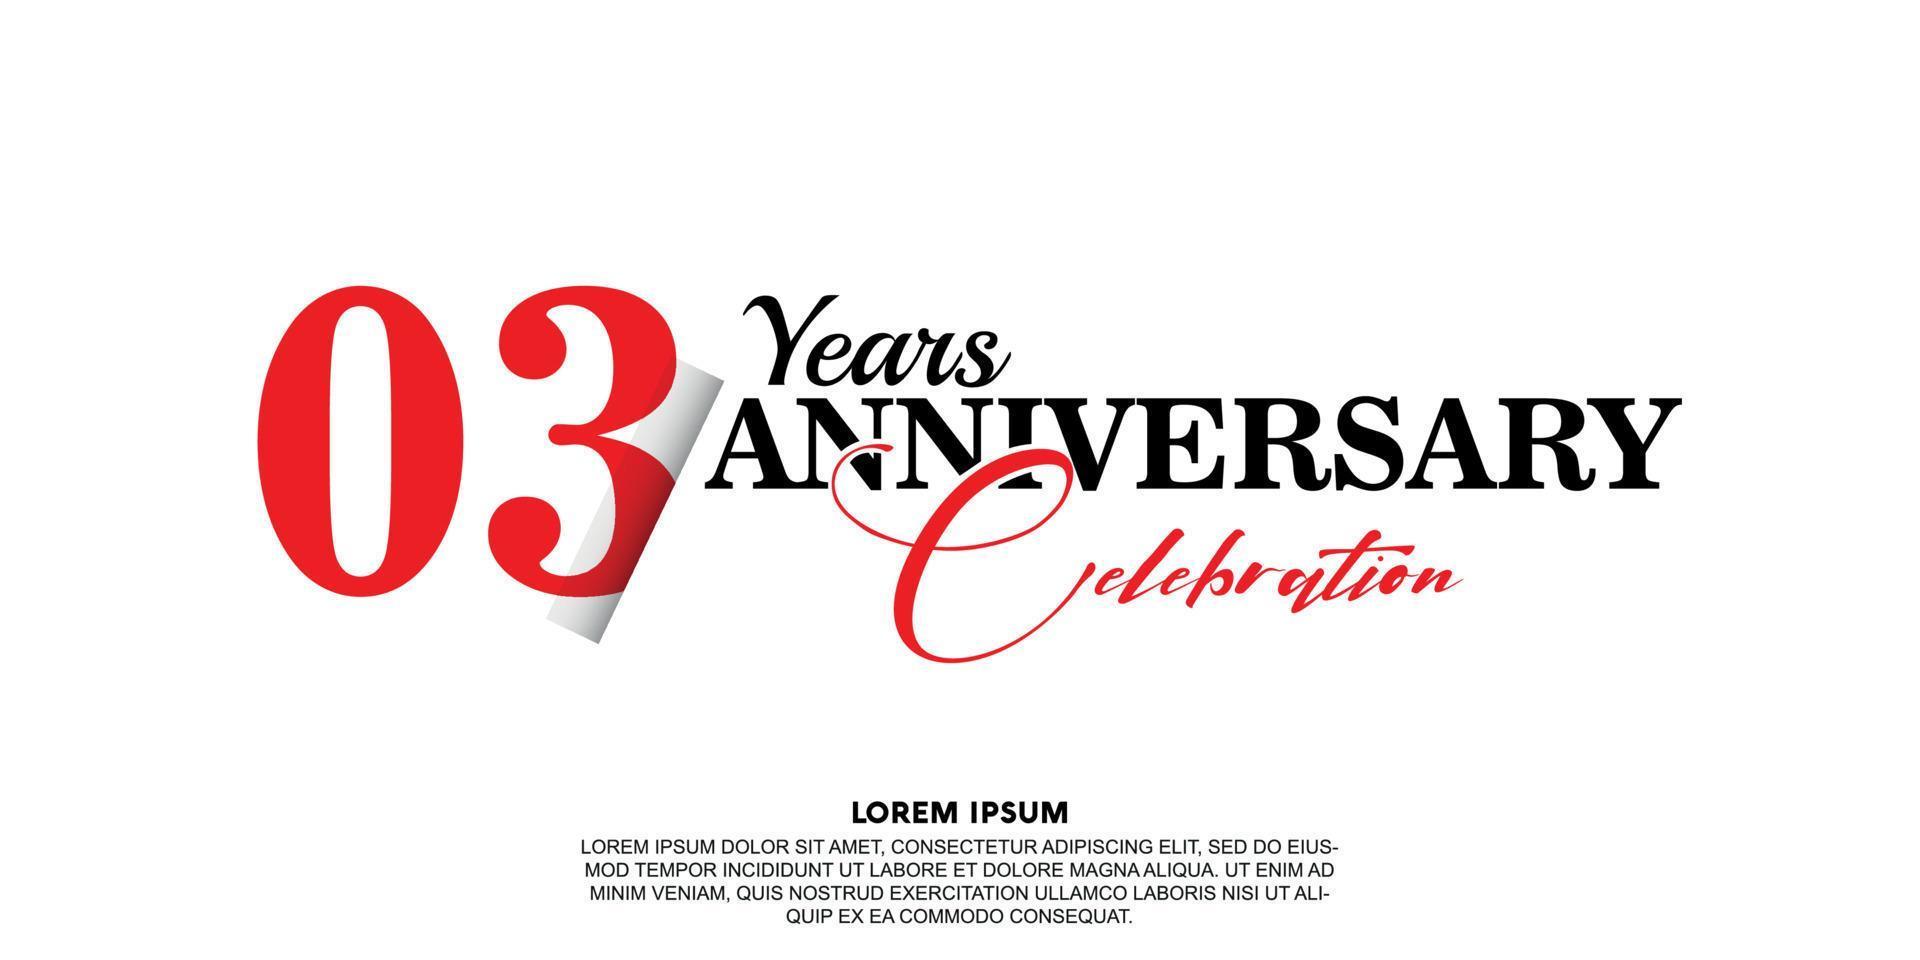 03 year anniversary celebration logo vector design with red and black color on white background abstract